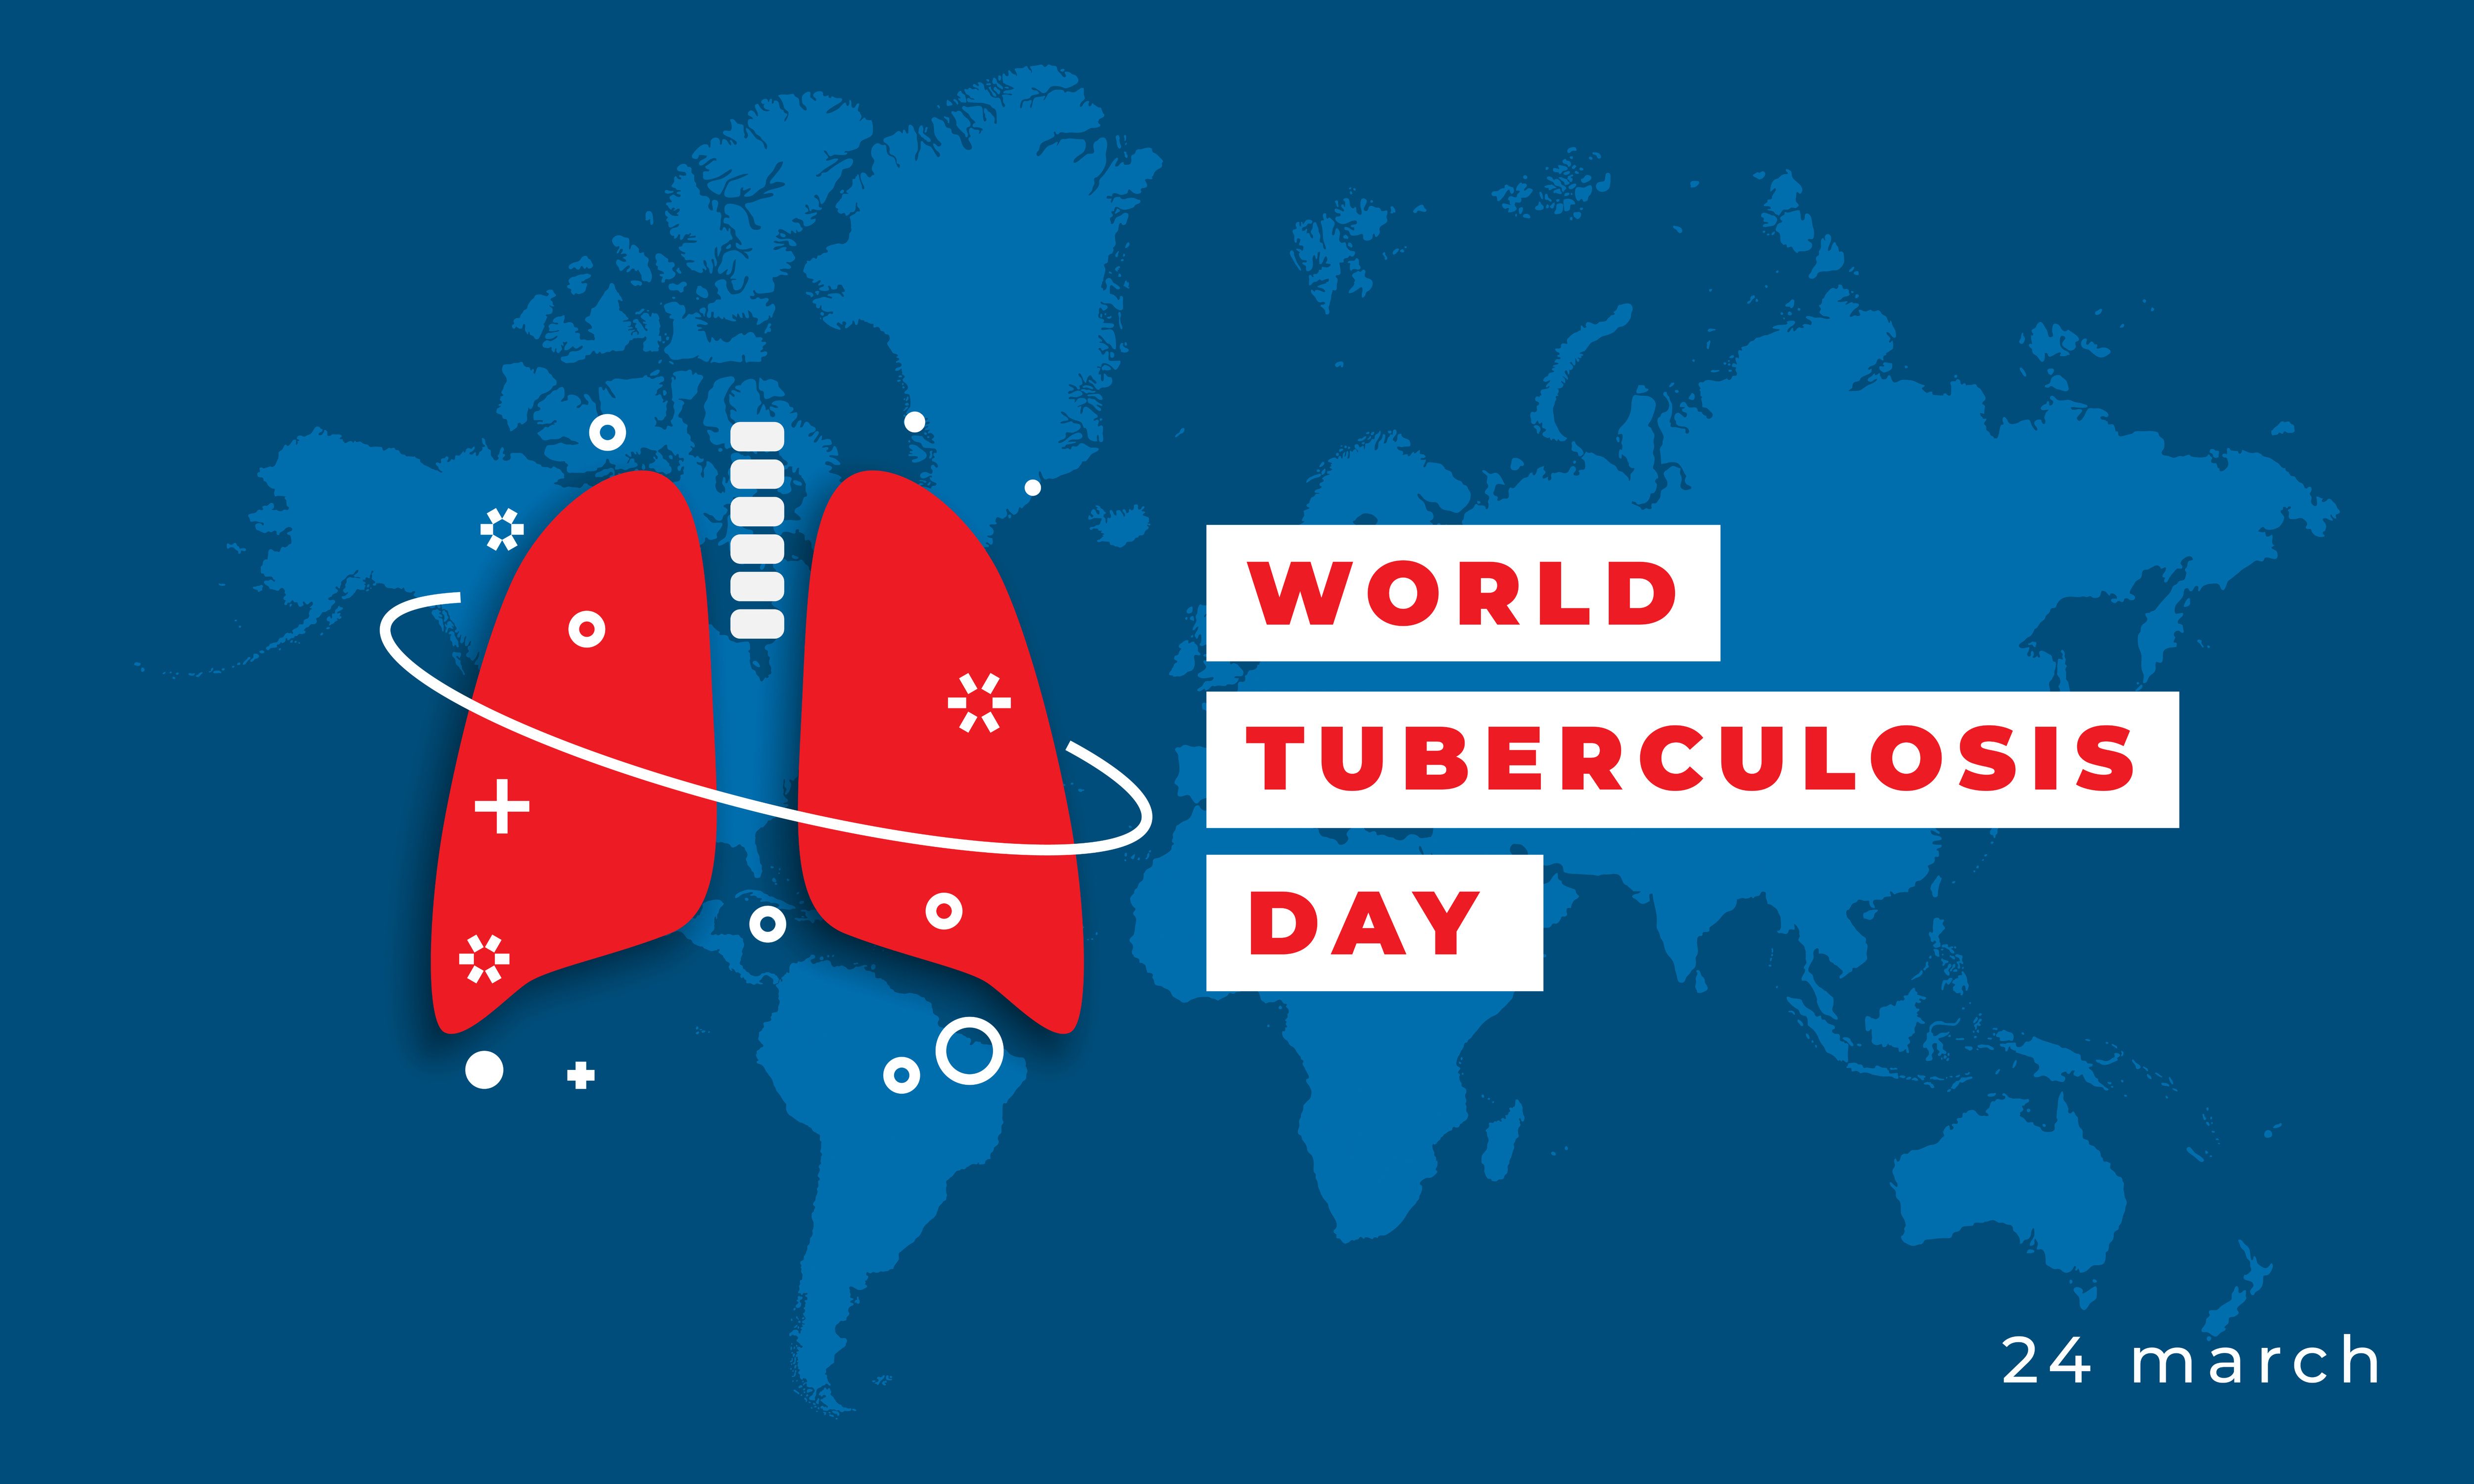 March 24 is World Tuberculosis Day. Here’s a brief history of the second deadliest infectious disease, as well as how it affects the world today.